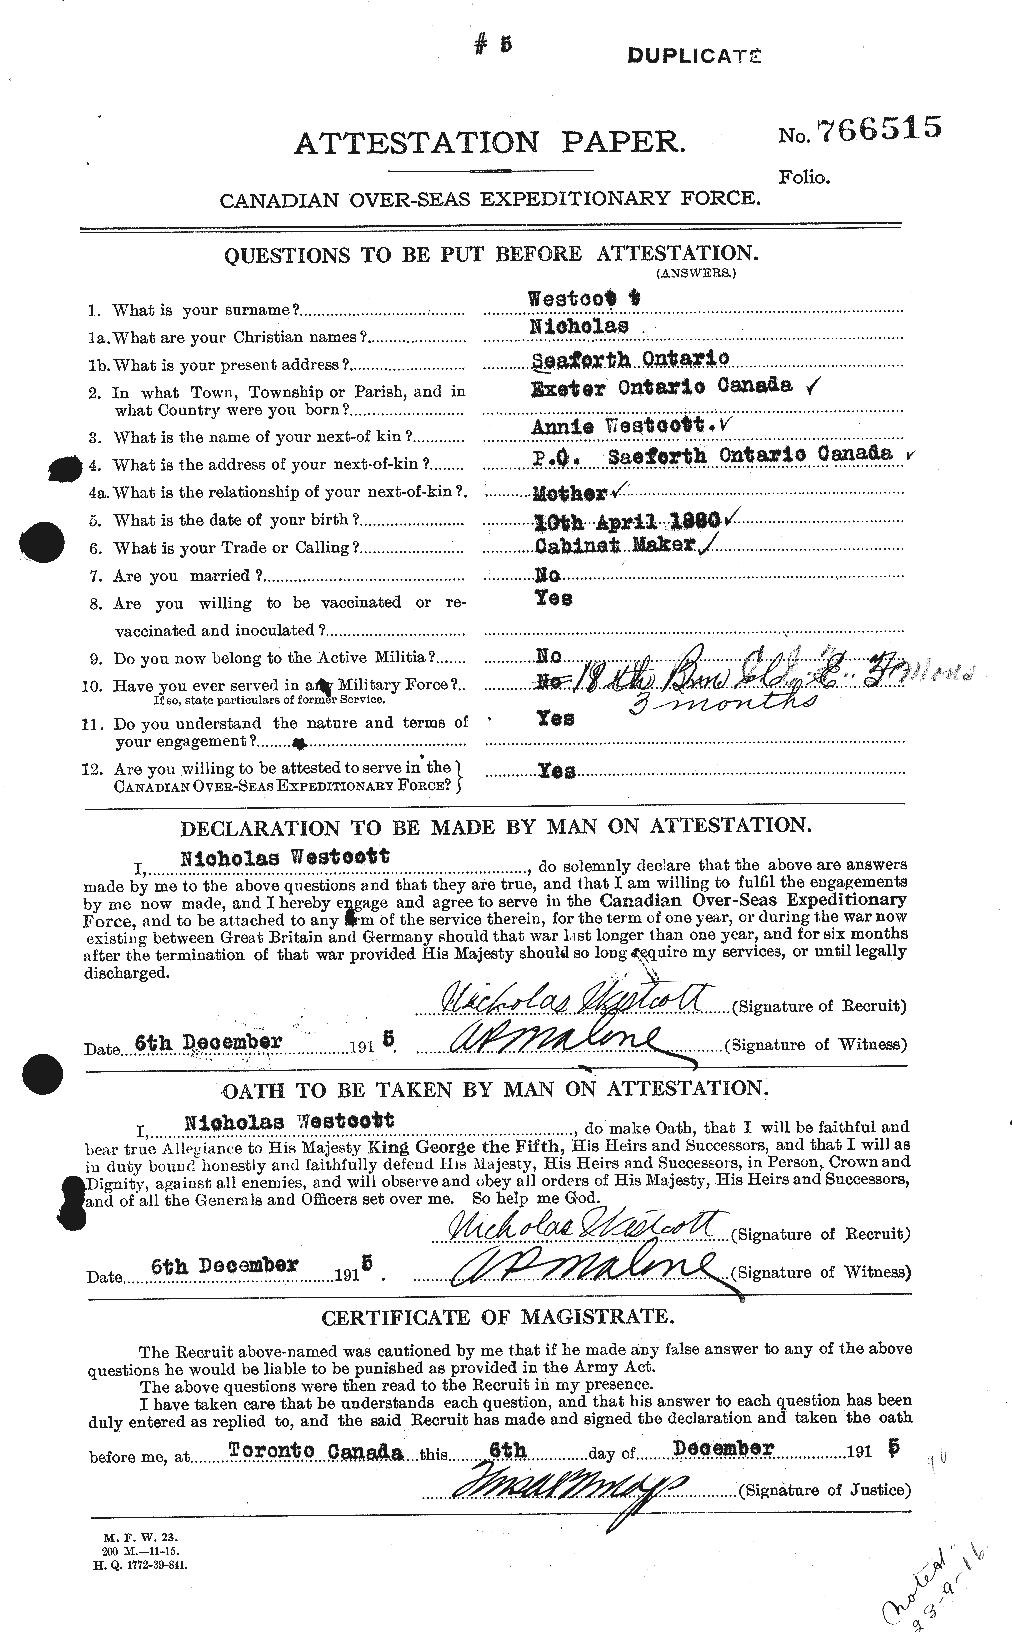 Personnel Records of the First World War - CEF 668119a